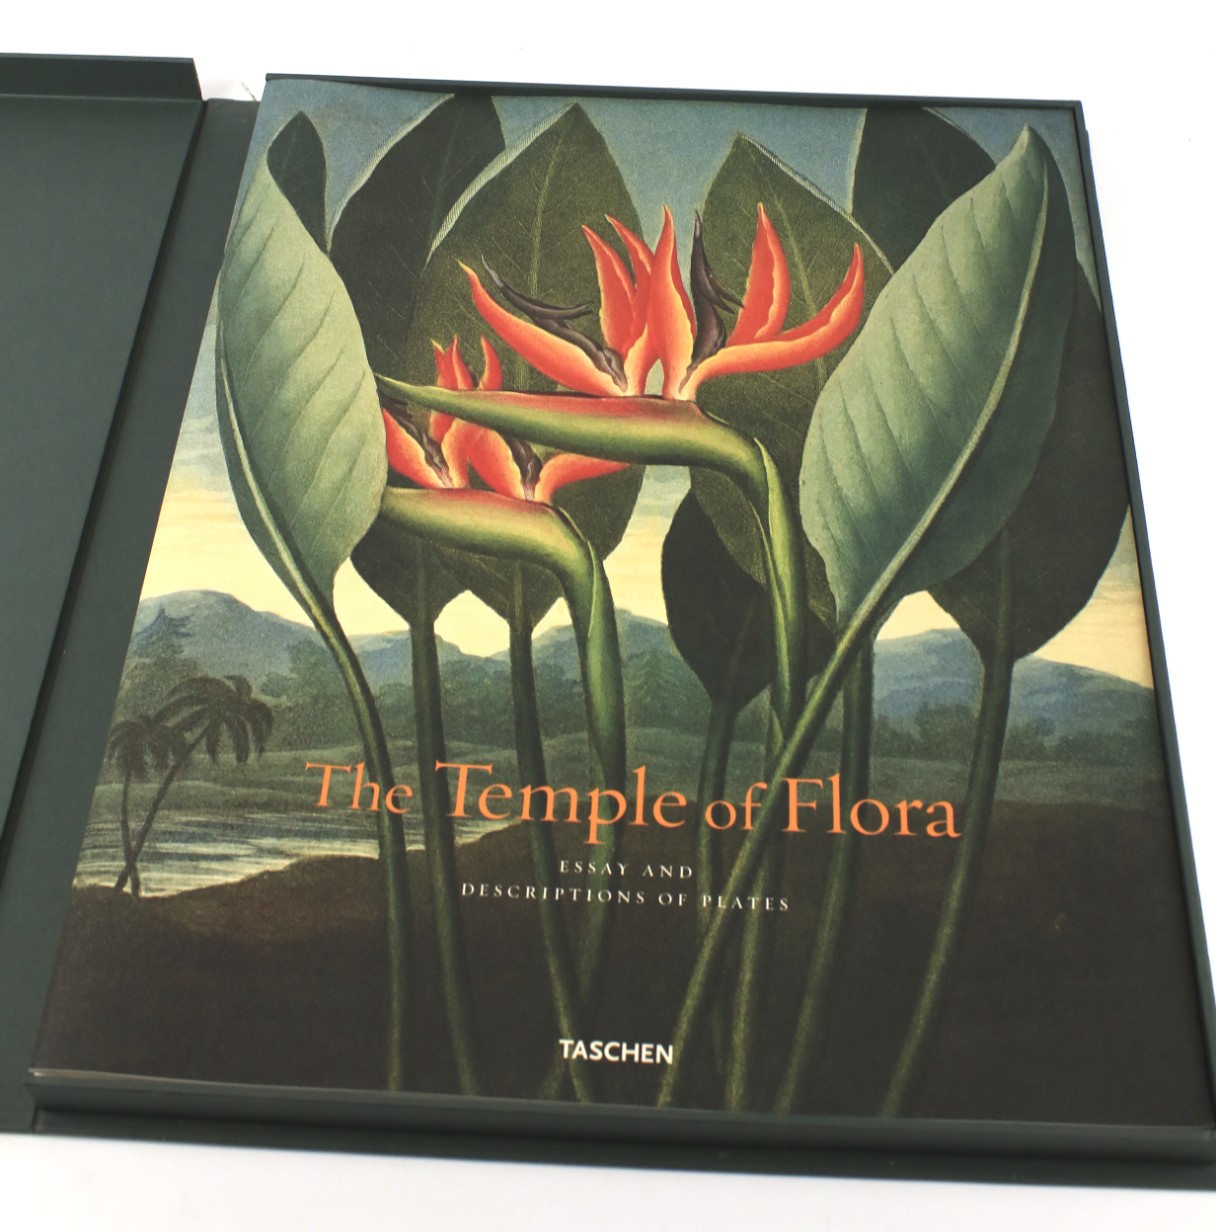 Robert John Thornton, 'The Temple of Flora' complete plates book. - Image 2 of 2